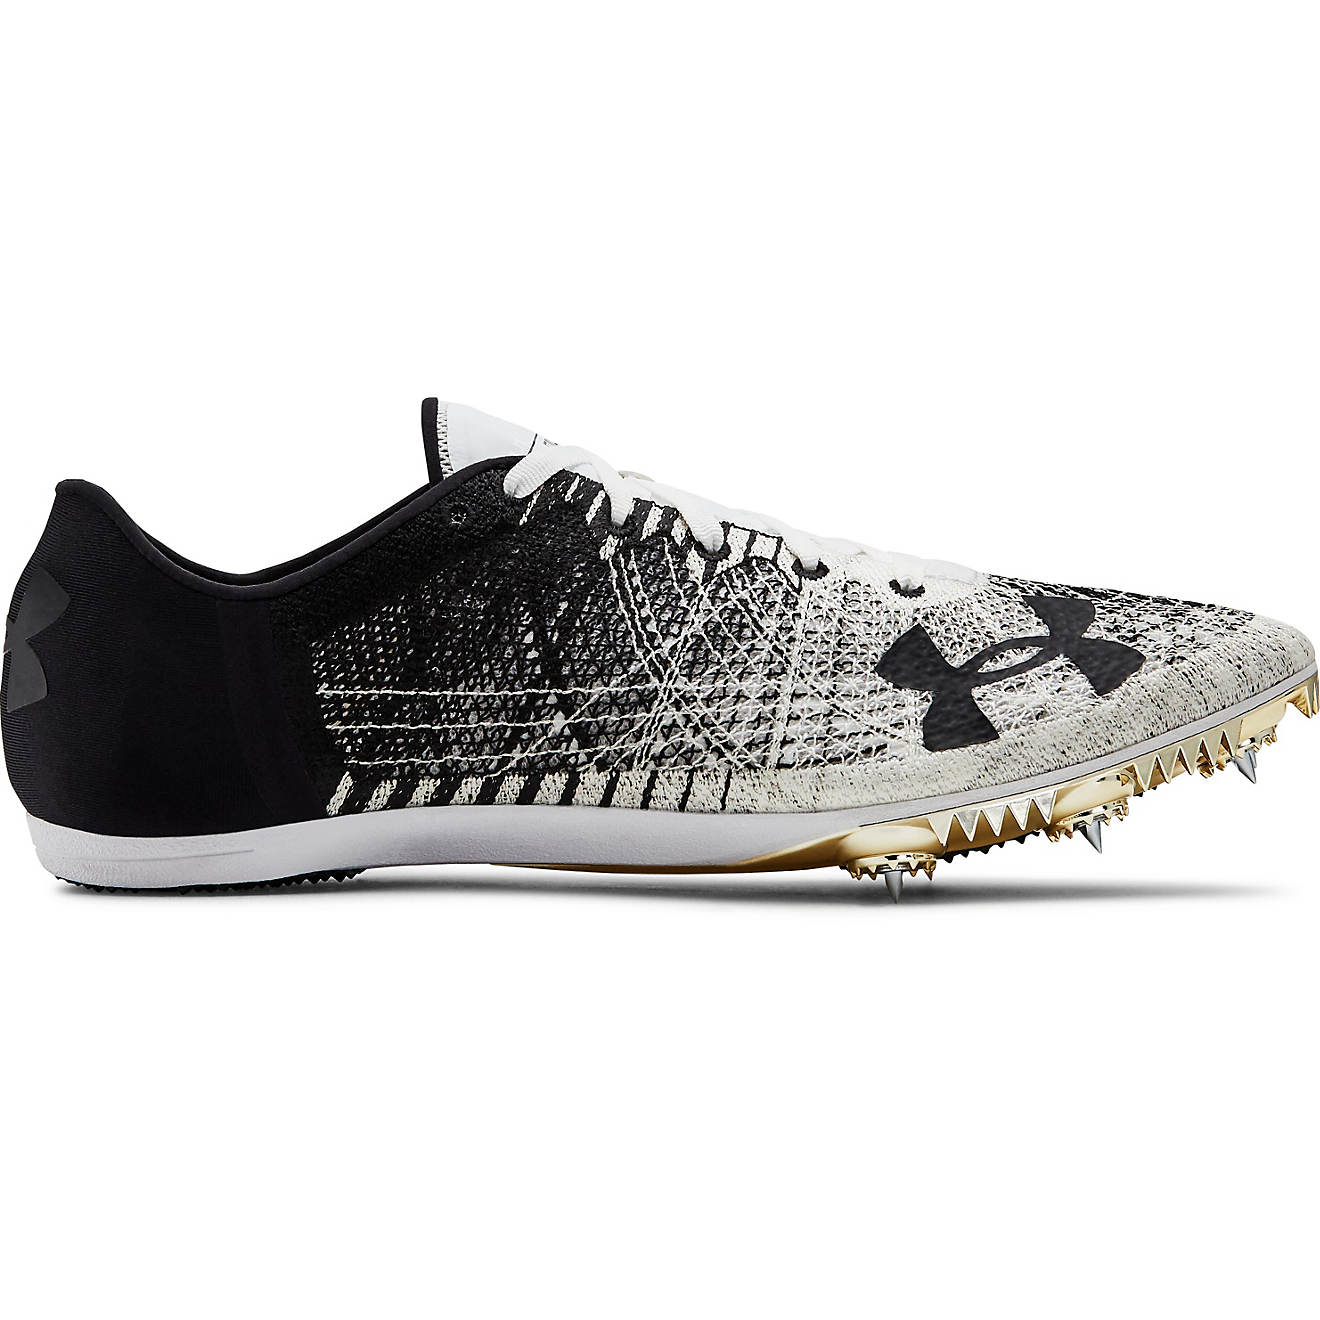 Under Armour Speedform Miler Pro Spiked Track Field Shoes Sz 6.5 1266204 299 for sale online 